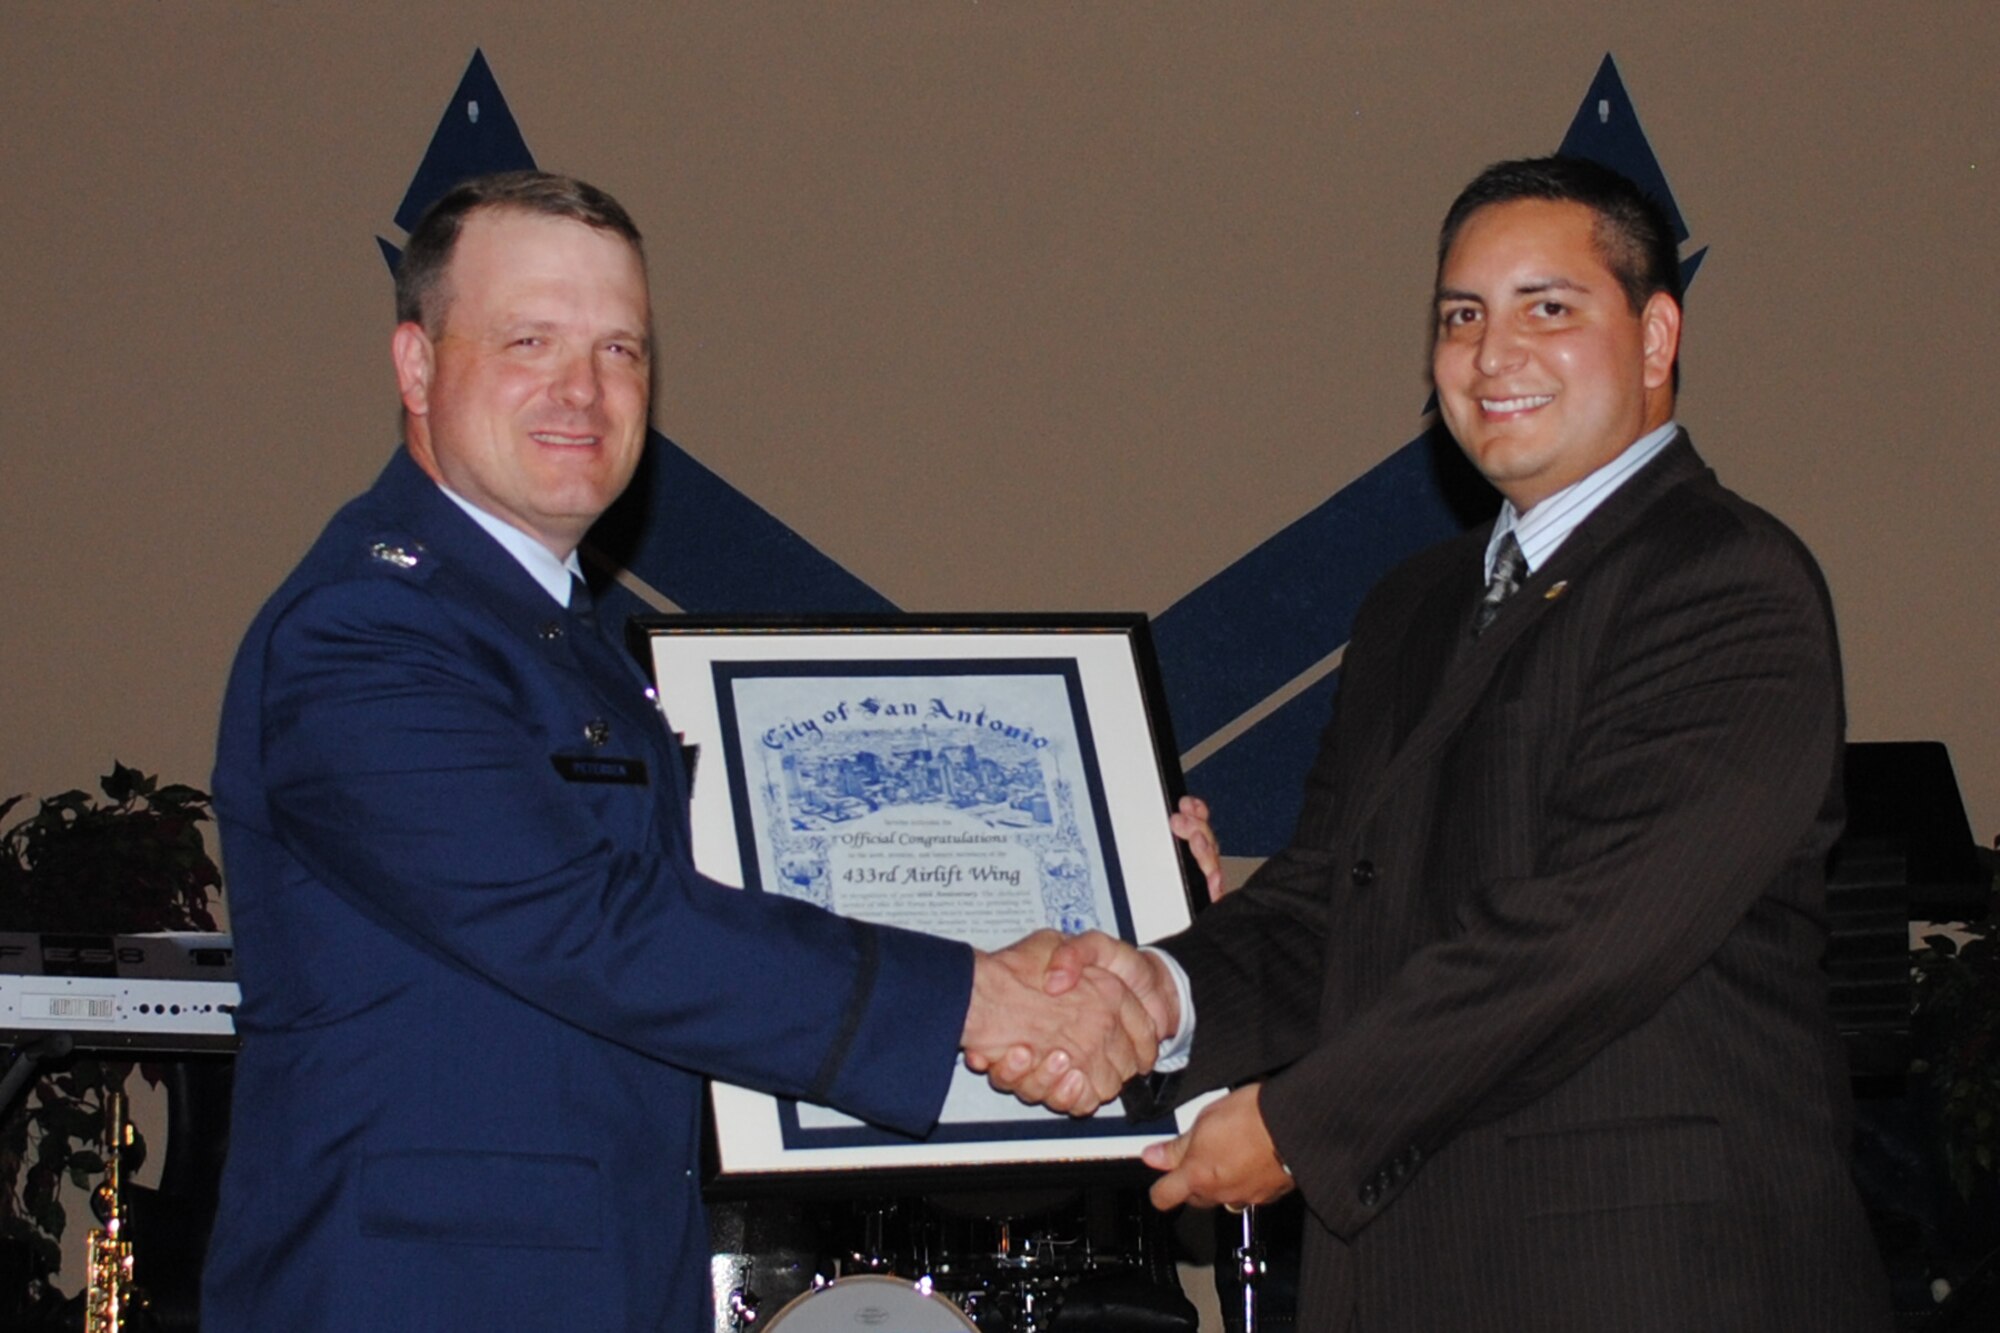 Col. Craig Petersen, 433rd Mission Support Group commander, poses for a photo with Former San Antonio city councilman, Philip Cortez, who presented the Alamo Wing with a congratulatory proclamation by the Honorable Julian Castro, mayor of San Antonio, during the 433rd Airlift Wing 60th Anniversary Dinner, held Sept. 10, 2011, at the Gateway Club on Lackland Air Force Base, Texas. Part of the proclamation read, “The dedicated service of this Air Force Reserve Unit to providing operational requirements is to be commended. Your devotion to supporting the mission of the Air Force is worthy of recognition and praise.” (U.S. Air Force photo/Senior Airman Luis Loza Gutierrez)